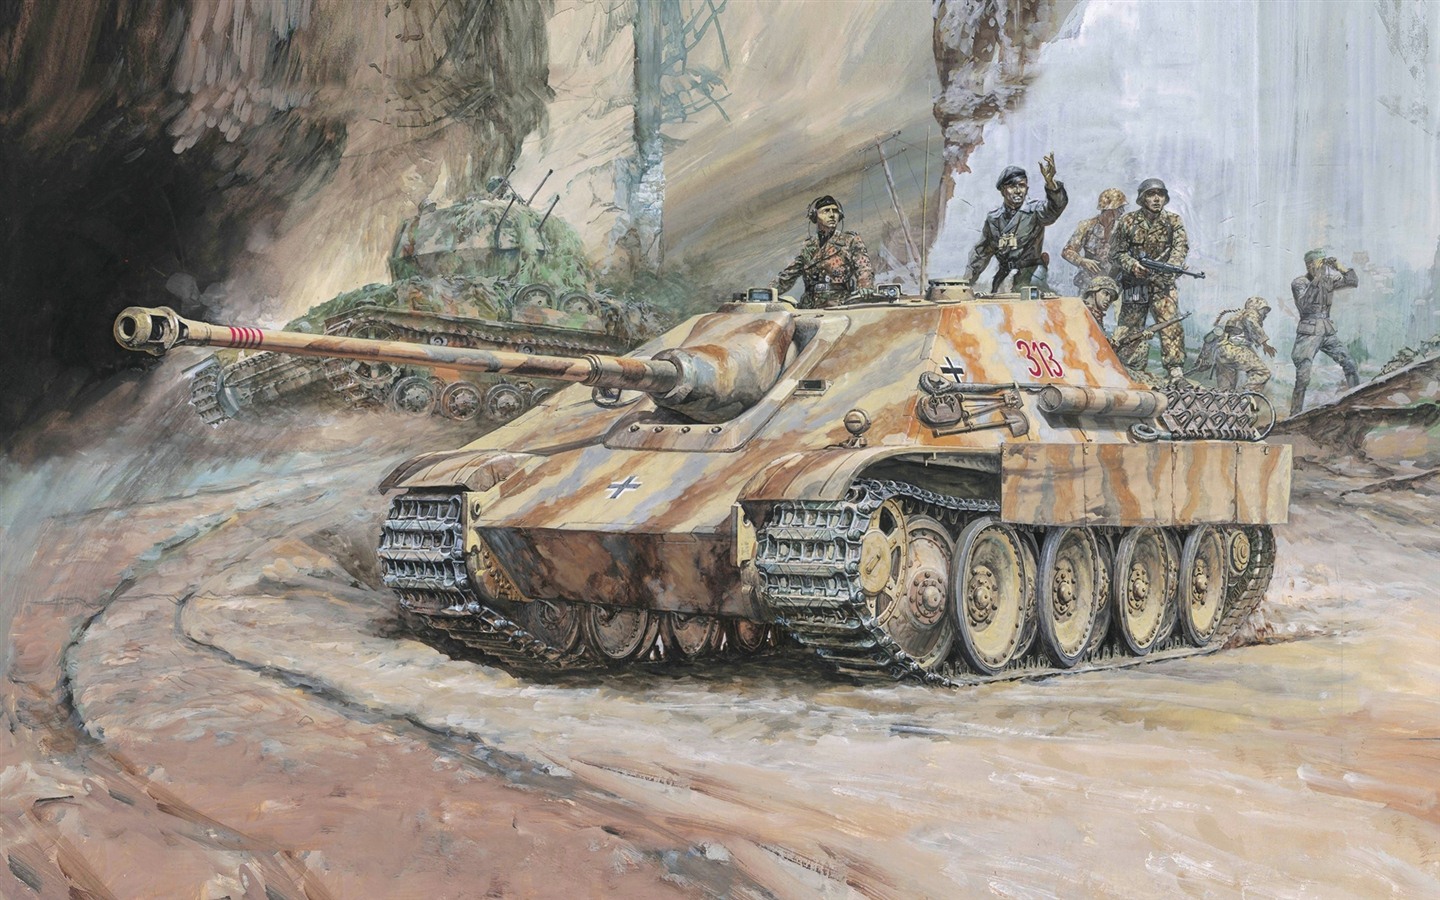 Military tanks, armored HD painting wallpapers #4 - 1440x900